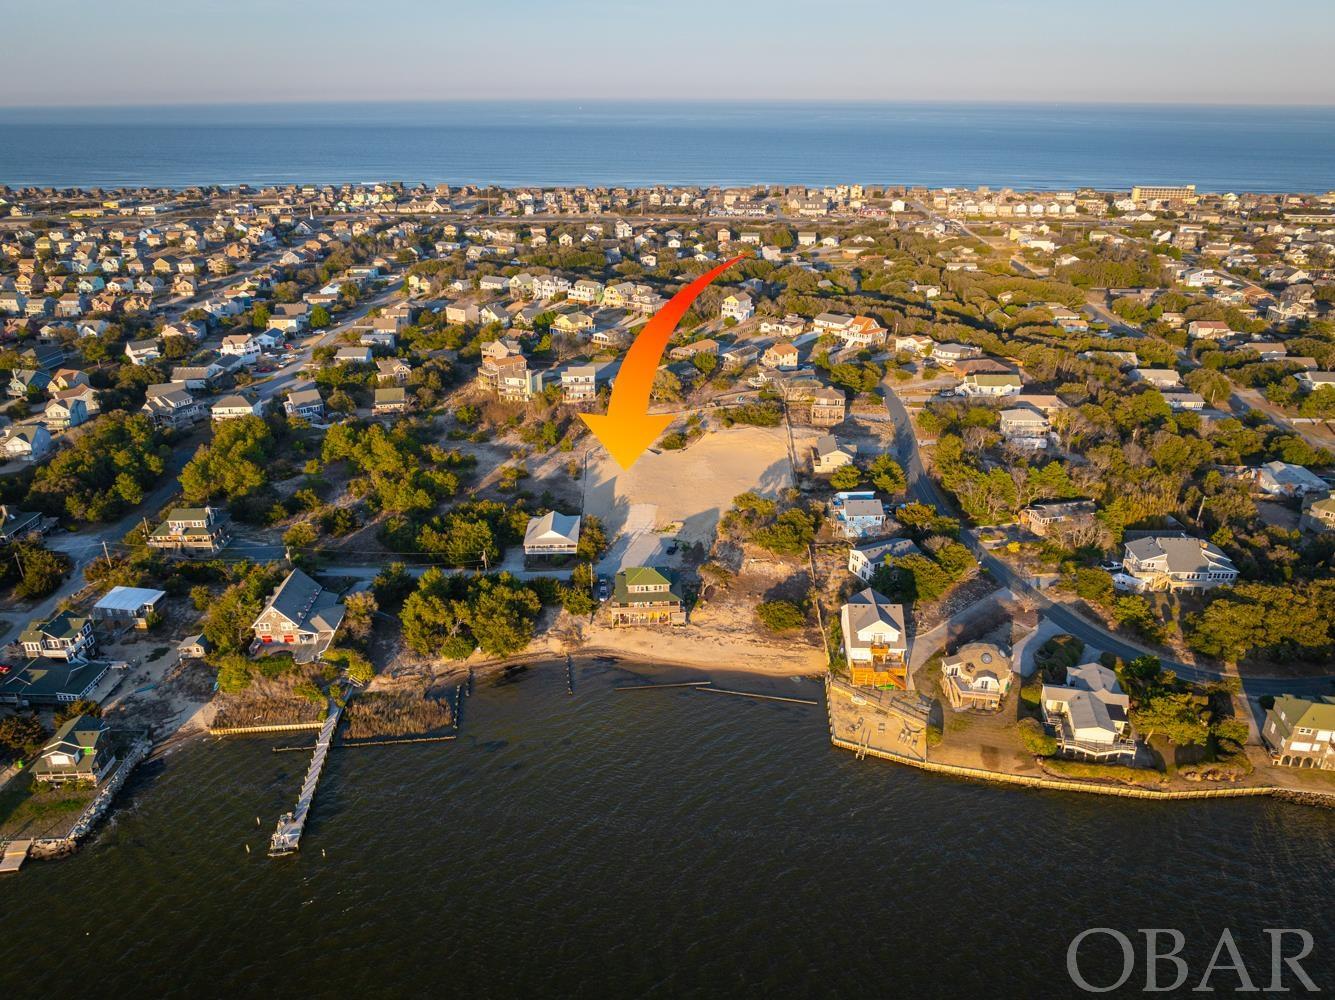 Large semi-sound front lot! One of the few rare vacant semi sound front lots left in Nags Head! This property has already been cleared, filled and graded and is ready for your dream home featuring breath taking sound views!